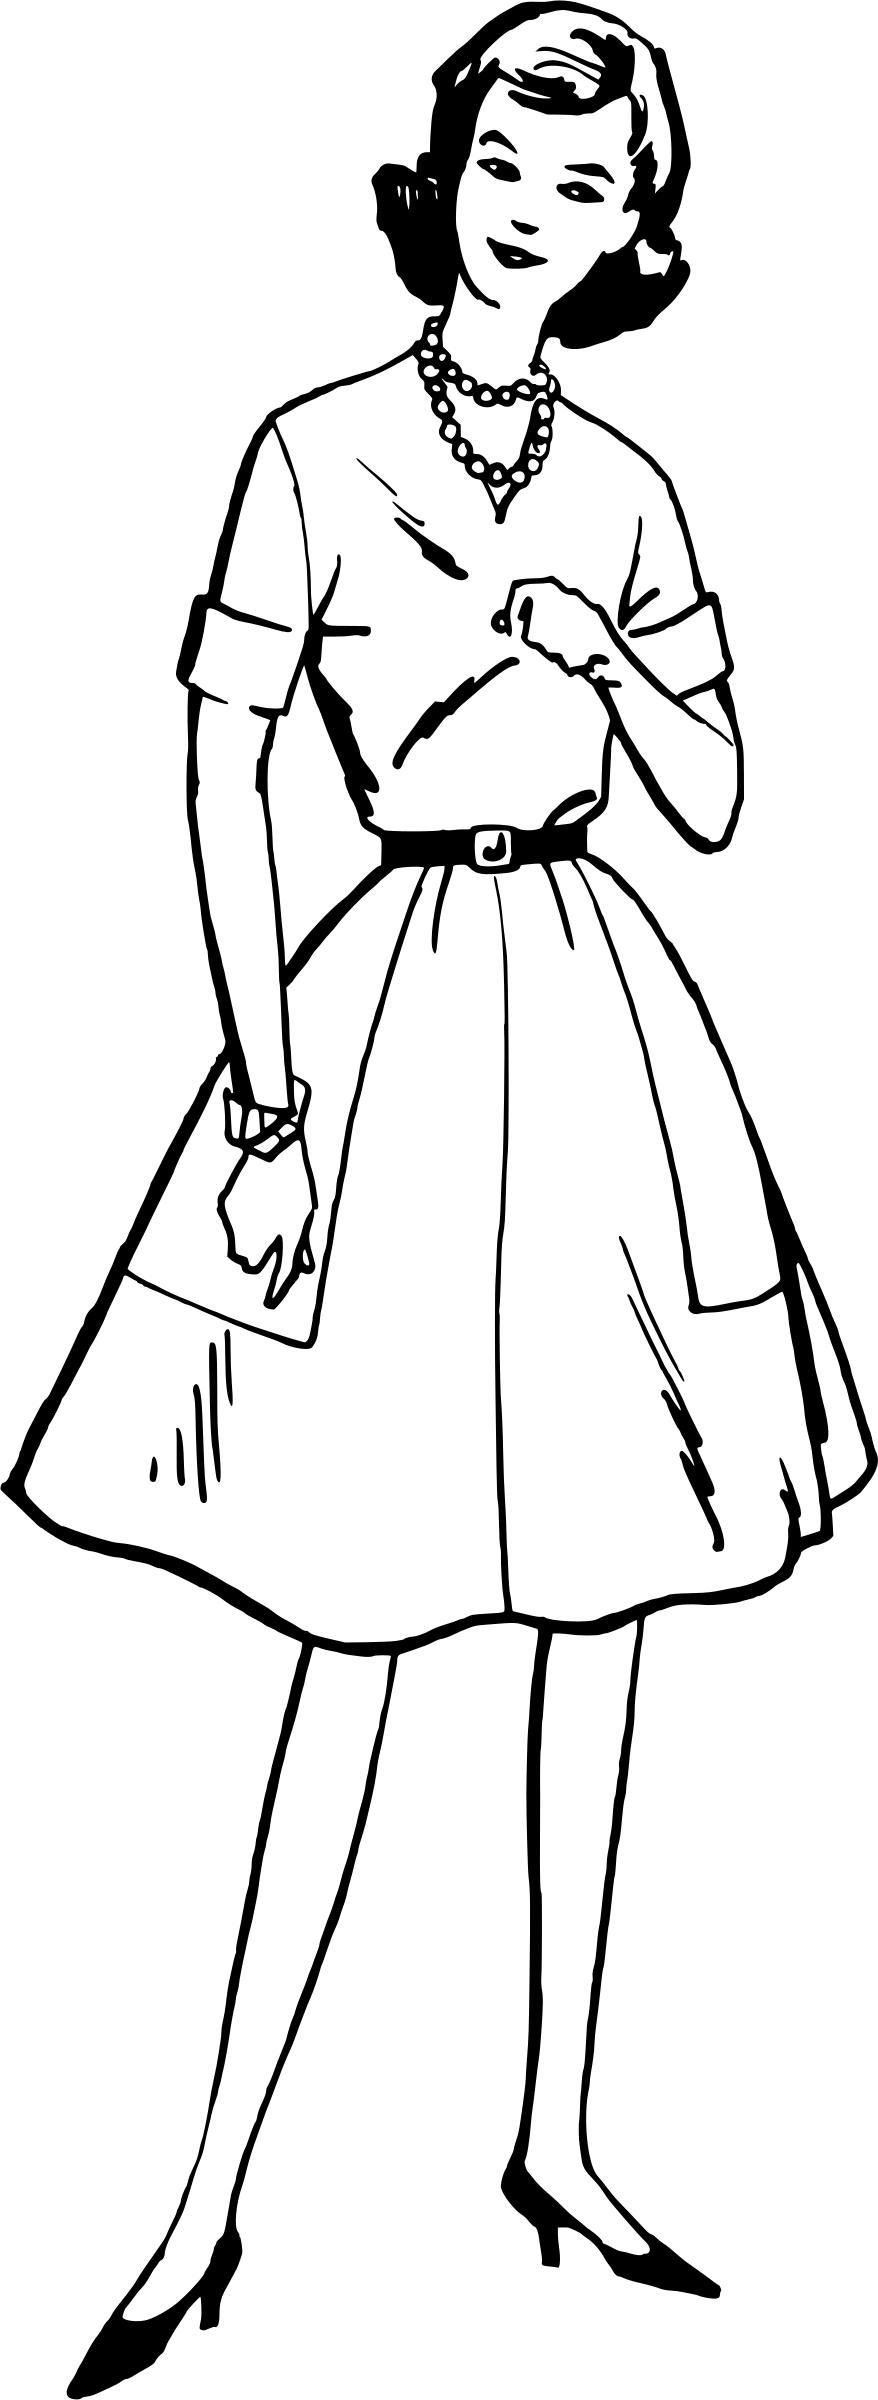 Lady in dress 4 png transparent